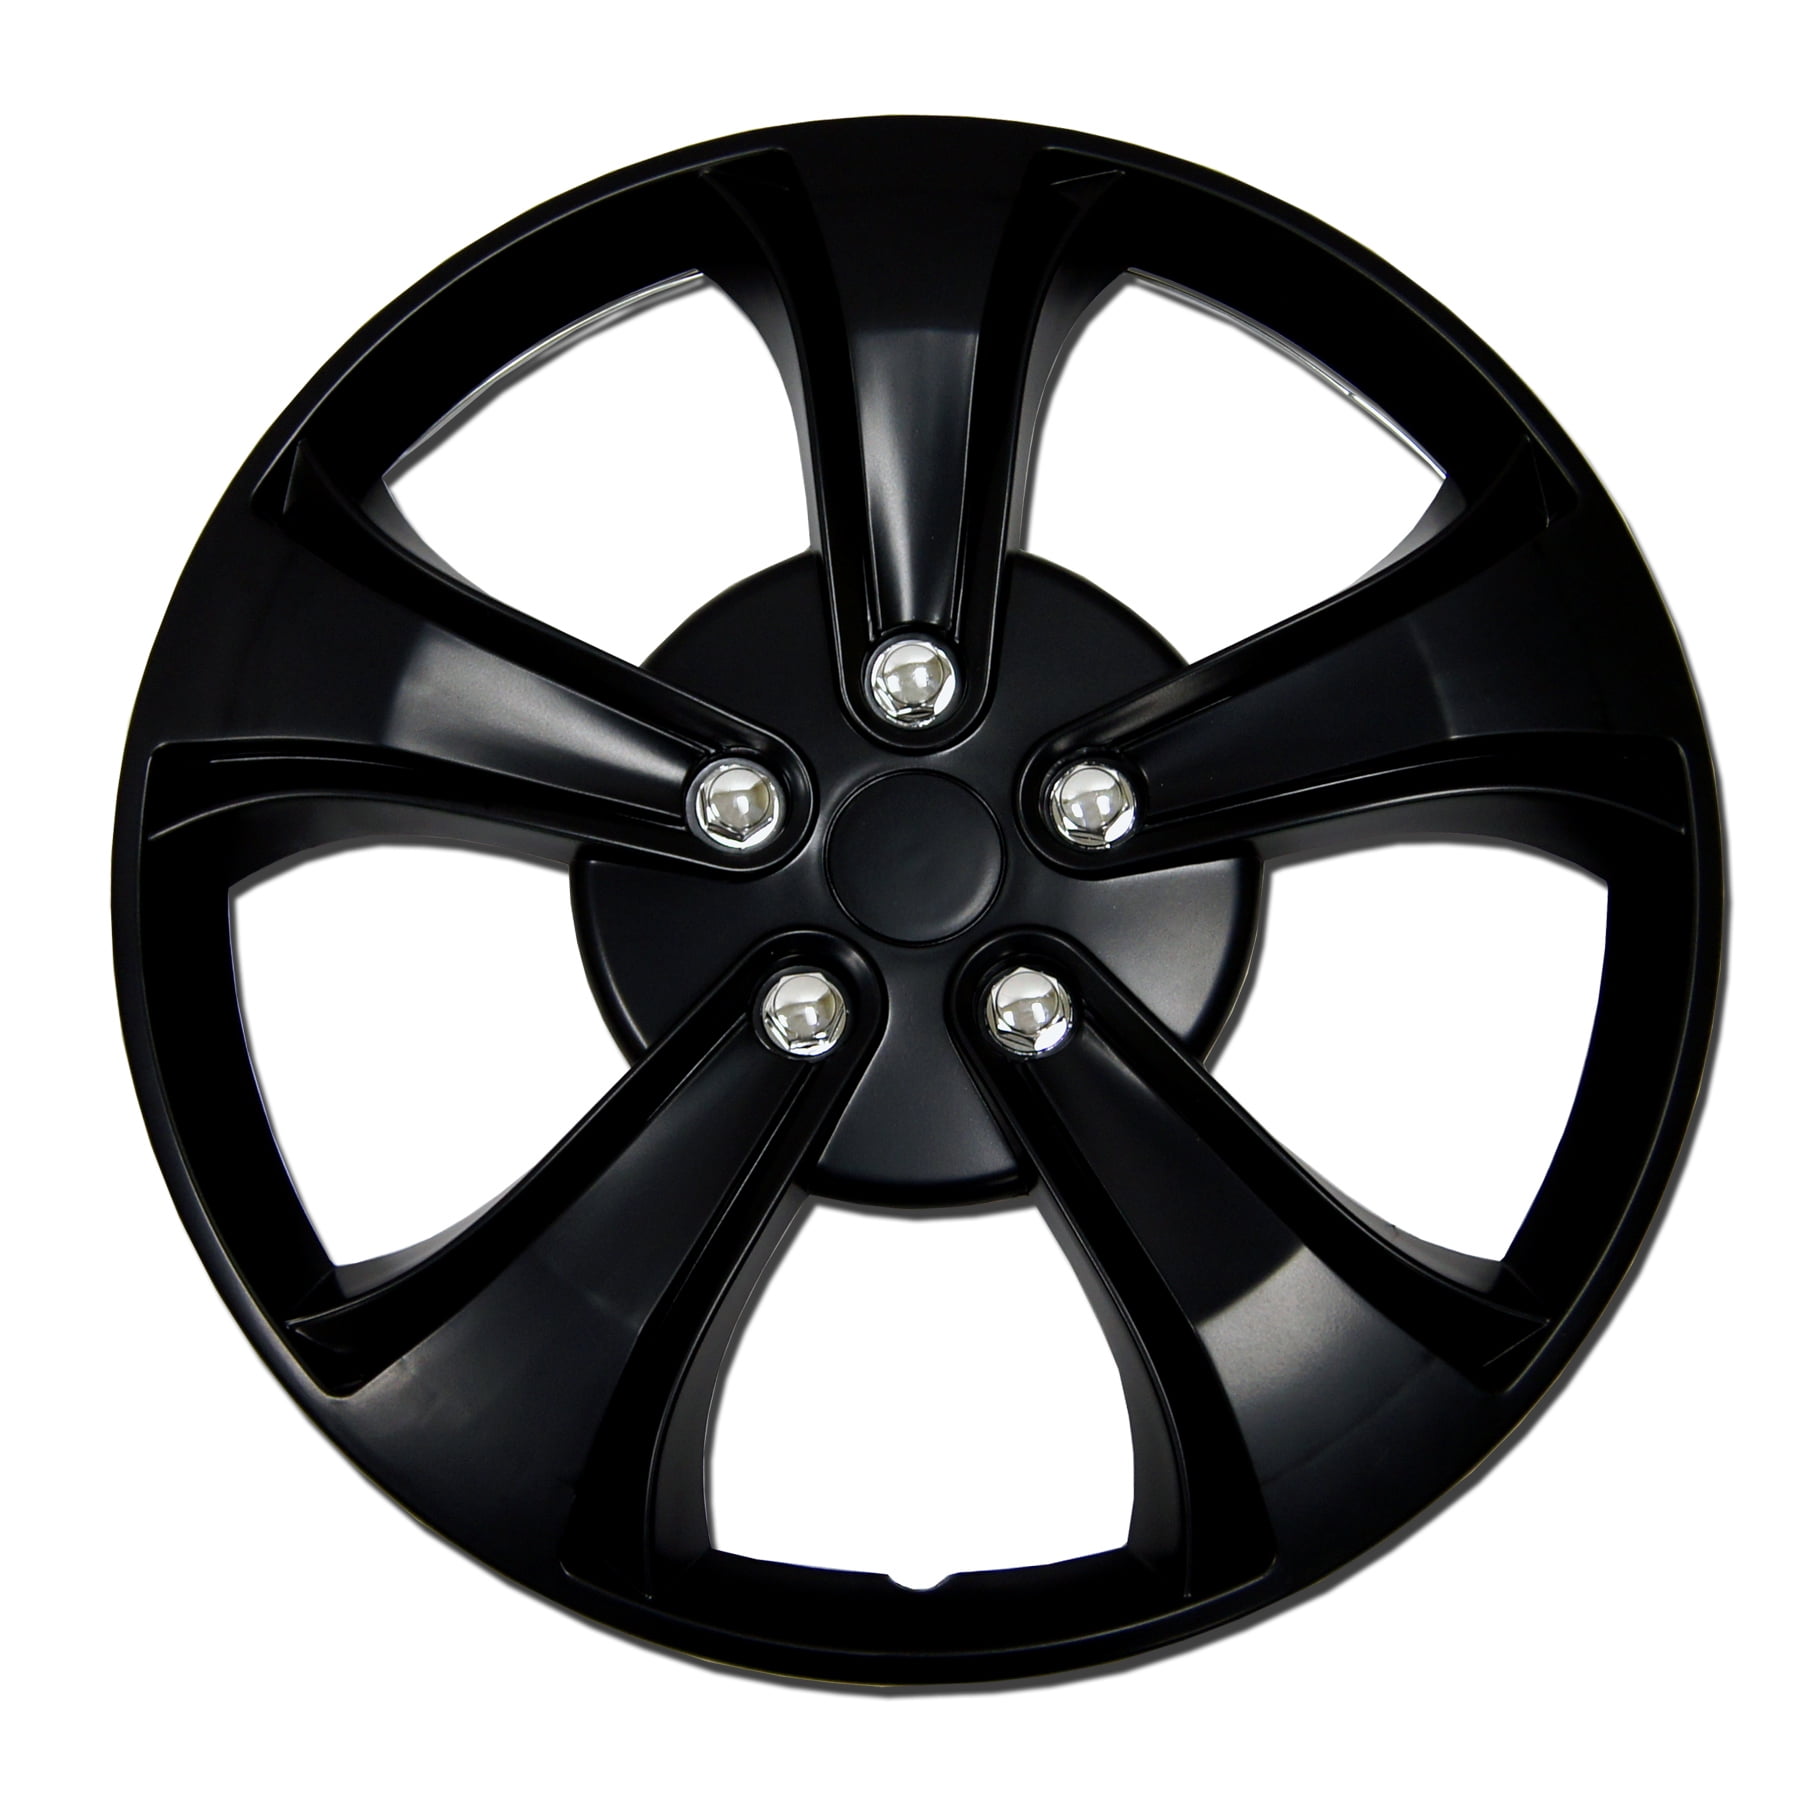 TuningPros WSC-126B15 Hubcaps Wheel Skin Cover 15-Inches Matte Black Set of 4 